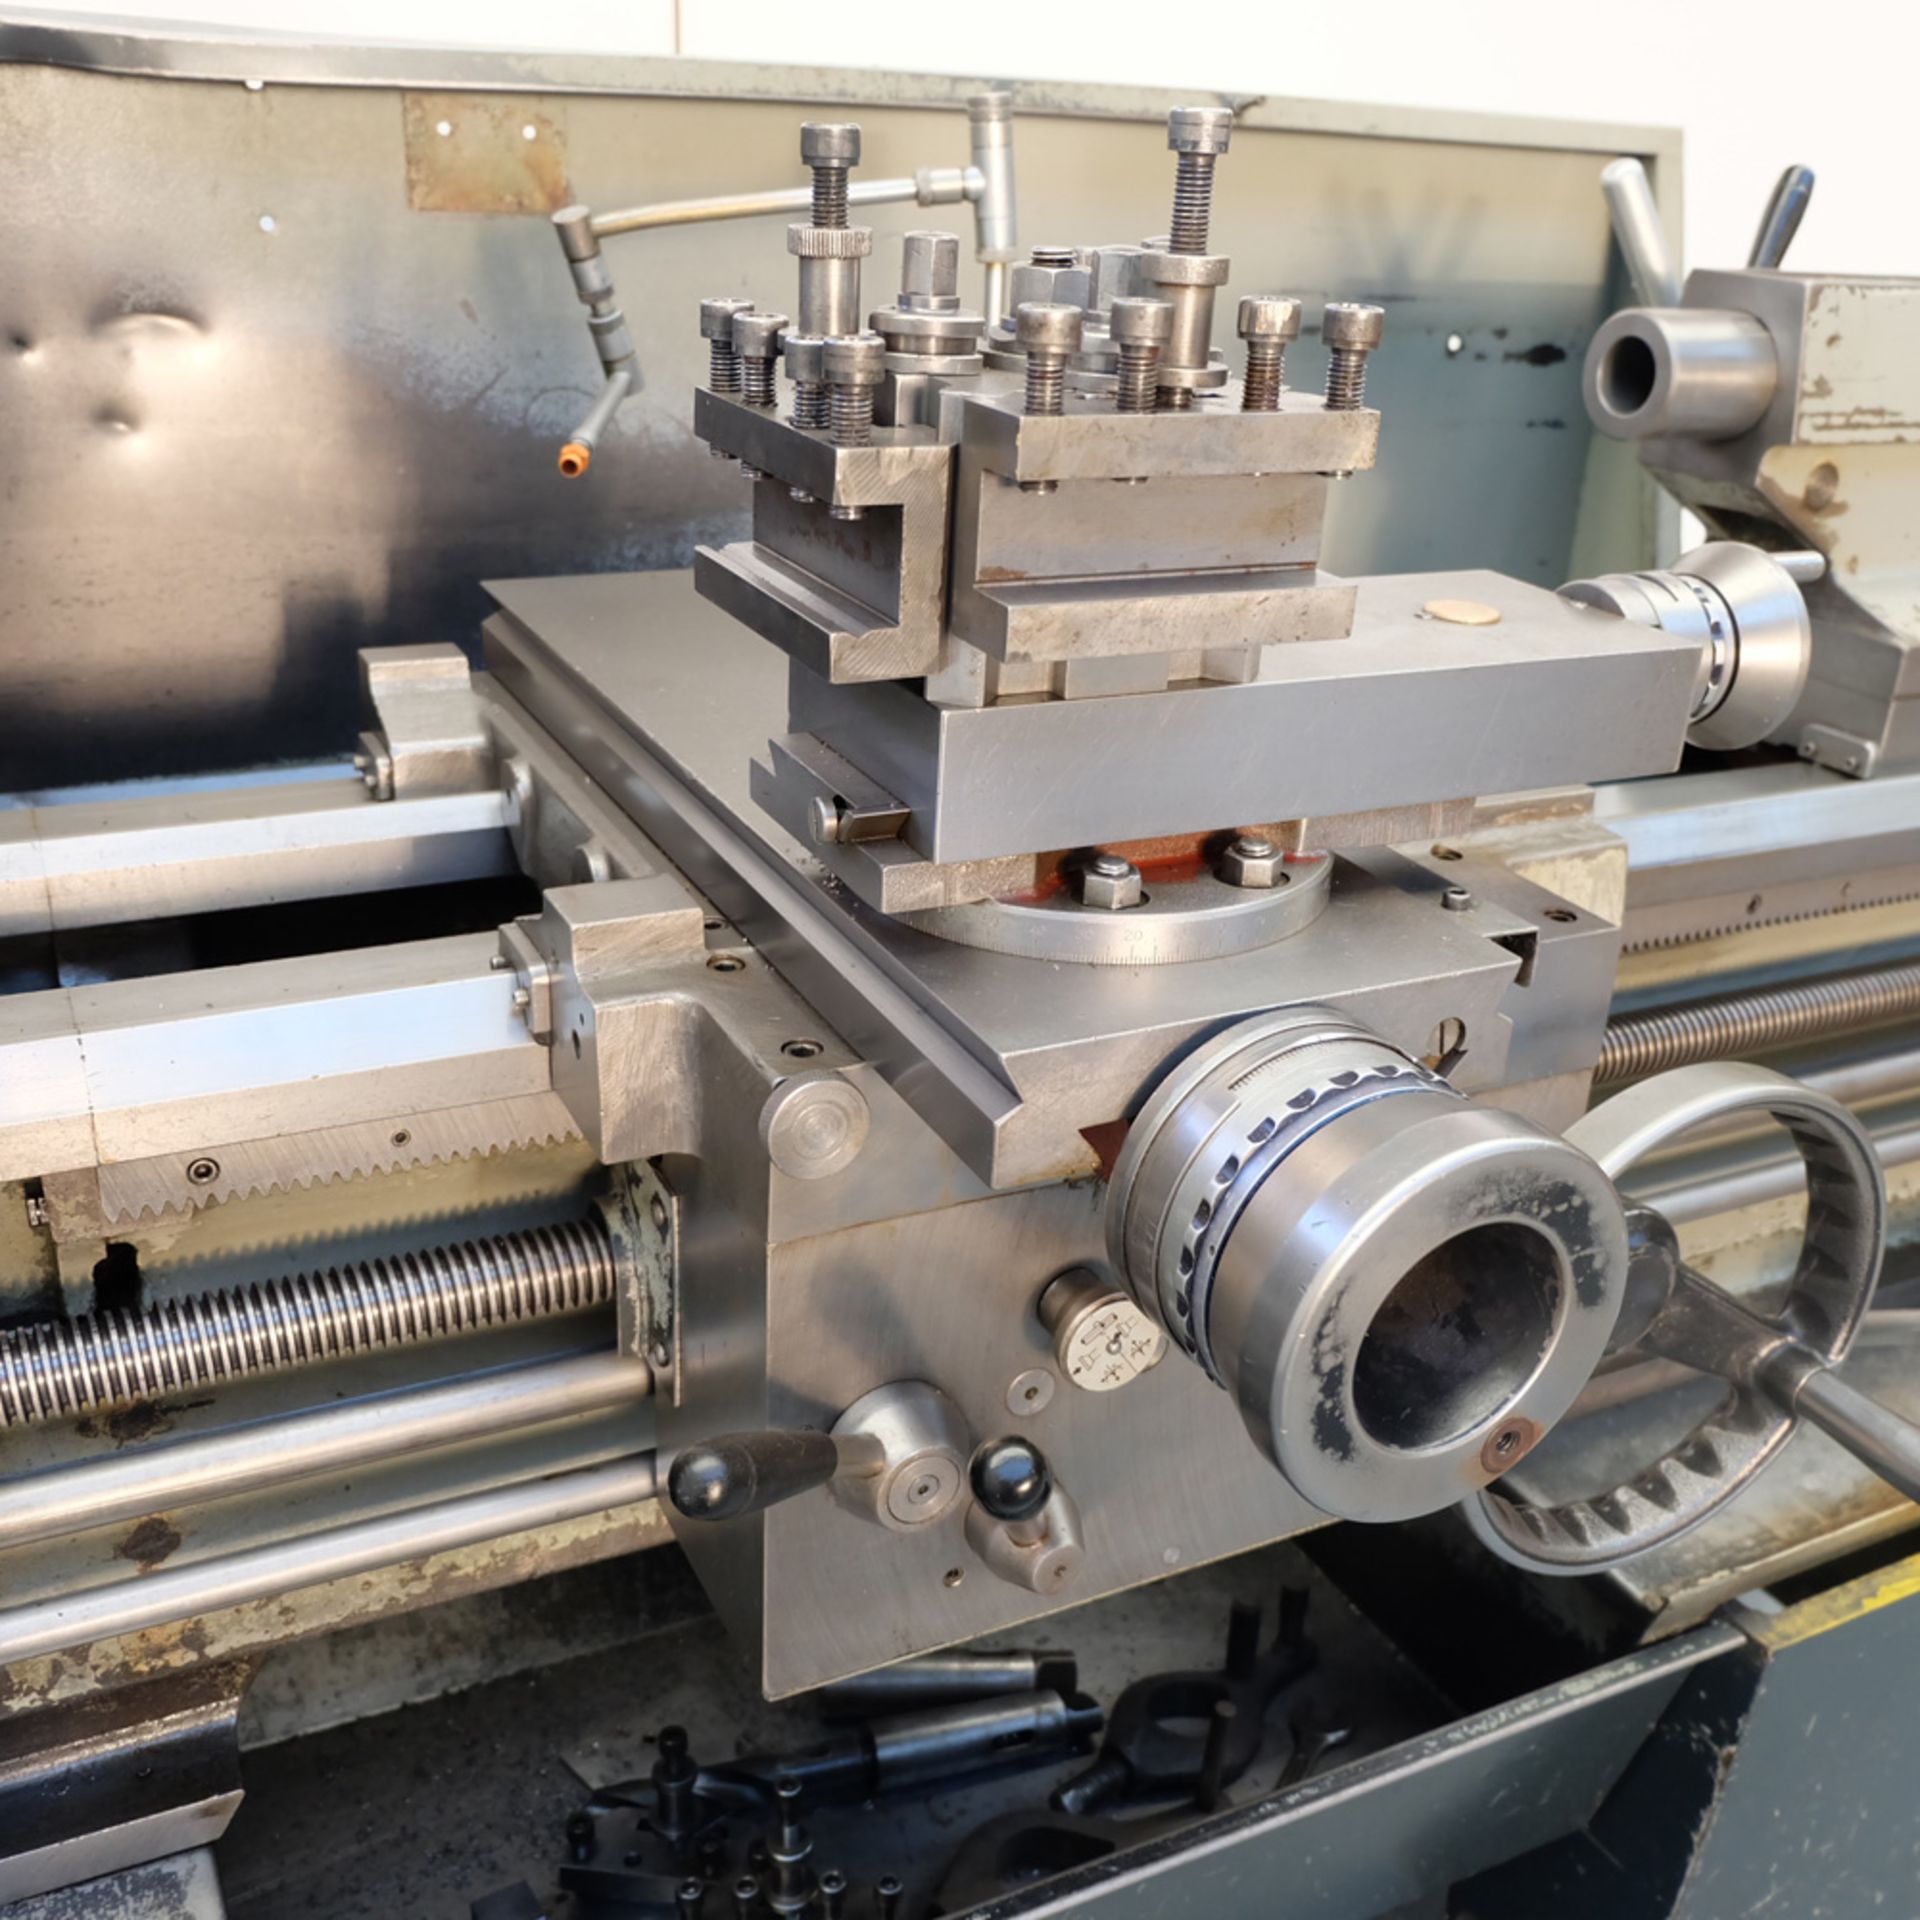 Colchester Mascot 1600 Gap Bed Centre Lathe. Swing Over Bed 17". Swing Over Cross Slide 10 1/2". - Image 9 of 13